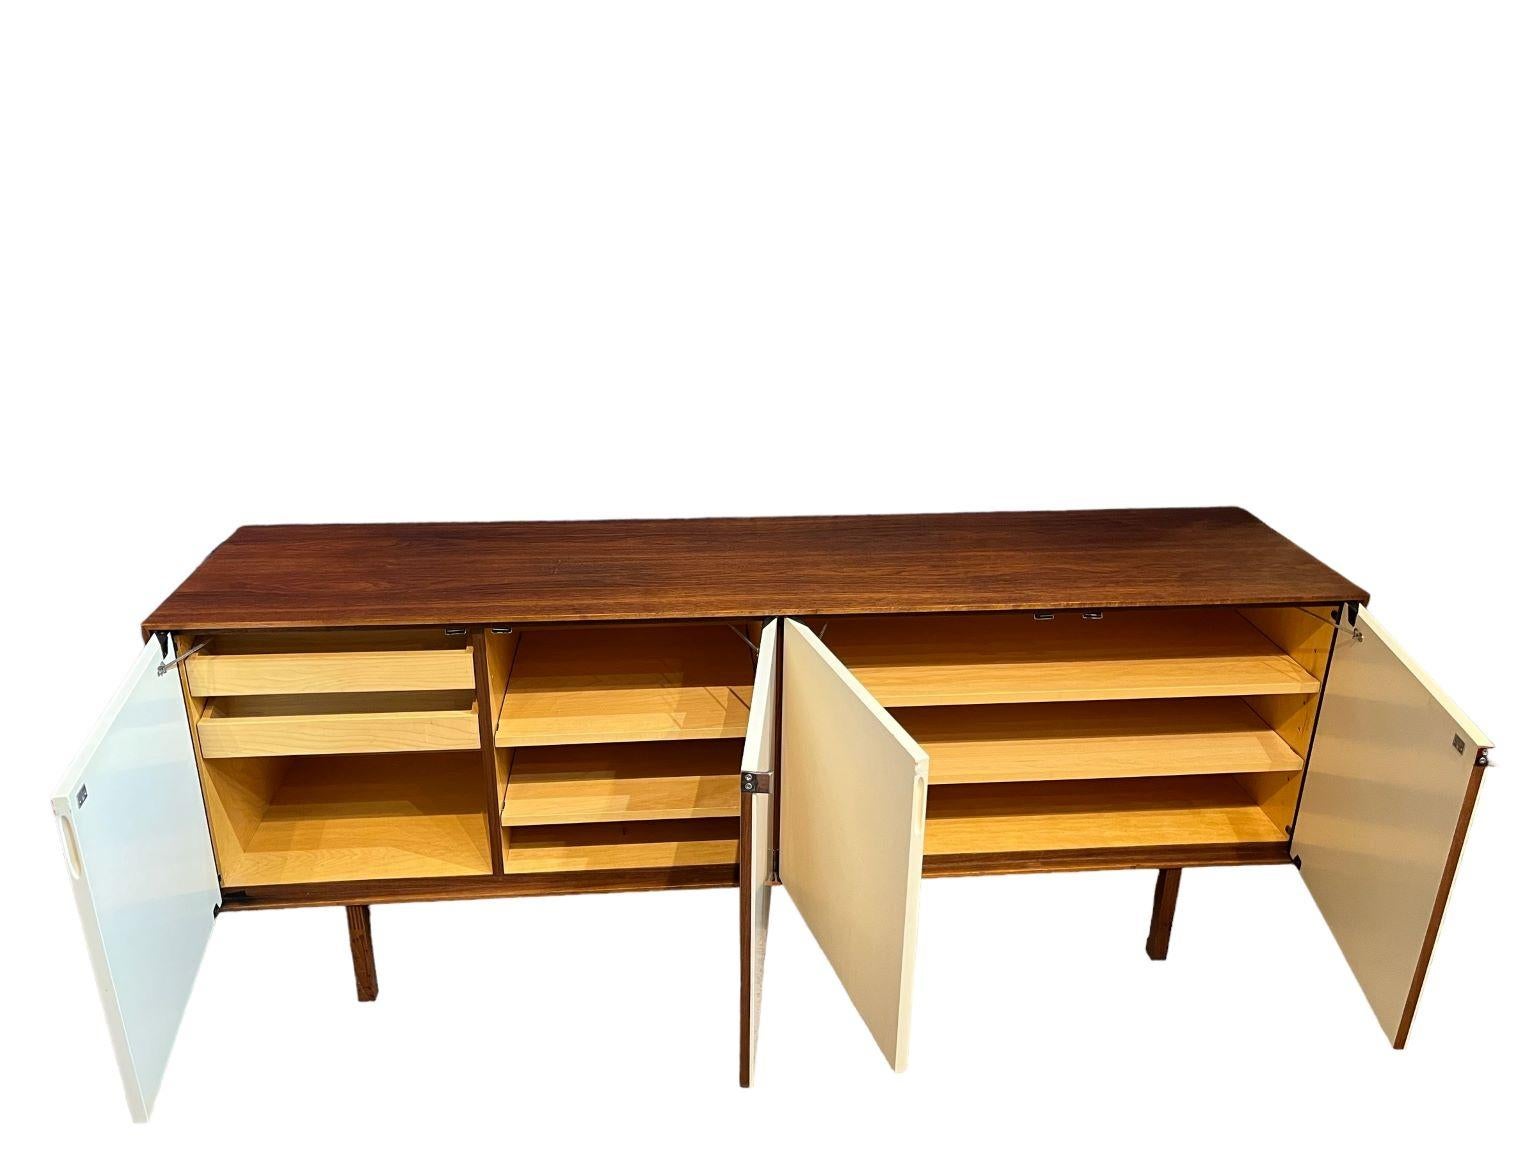 Painted Early Florance Knoll For Knoll Associates Walnut And Cream Credenza C.1950 For Sale